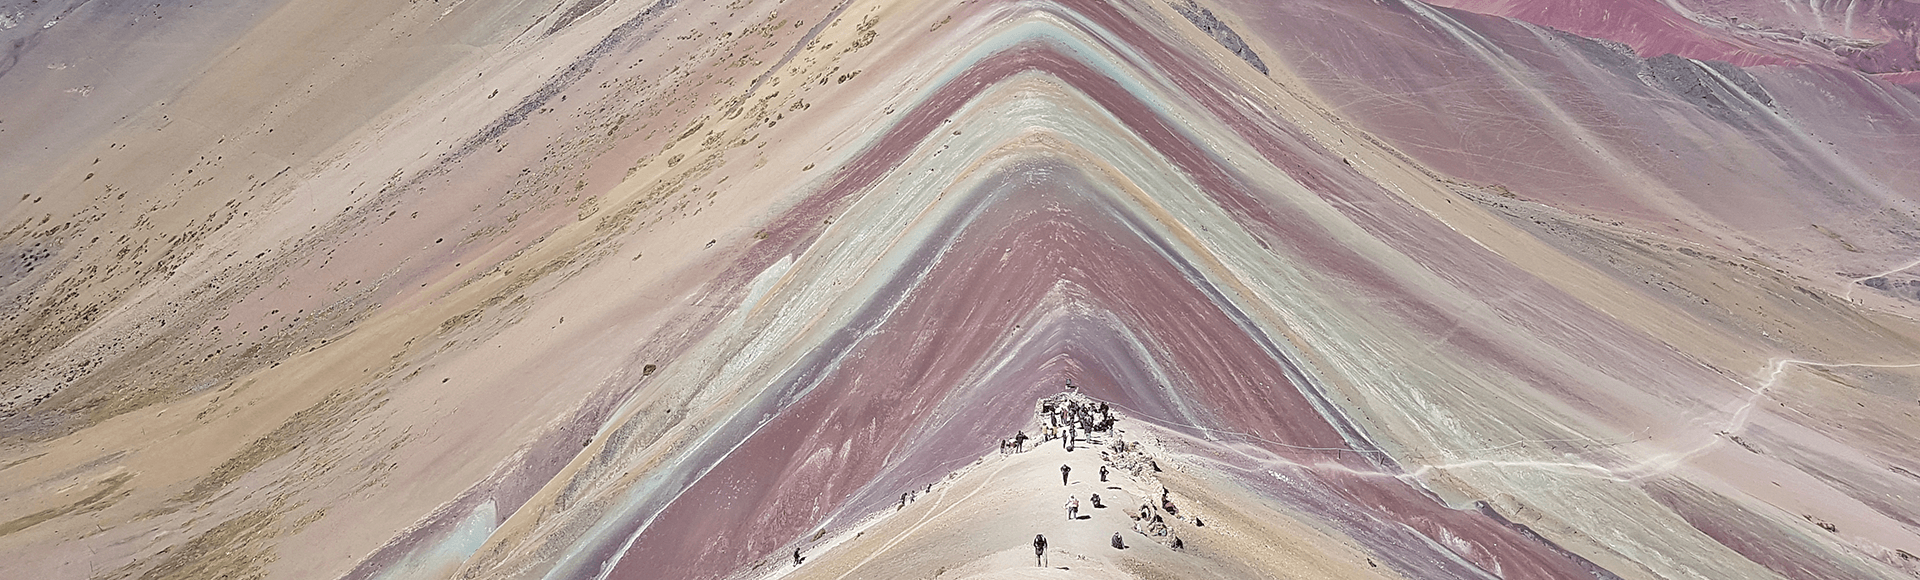 Mountain of the 7 colors